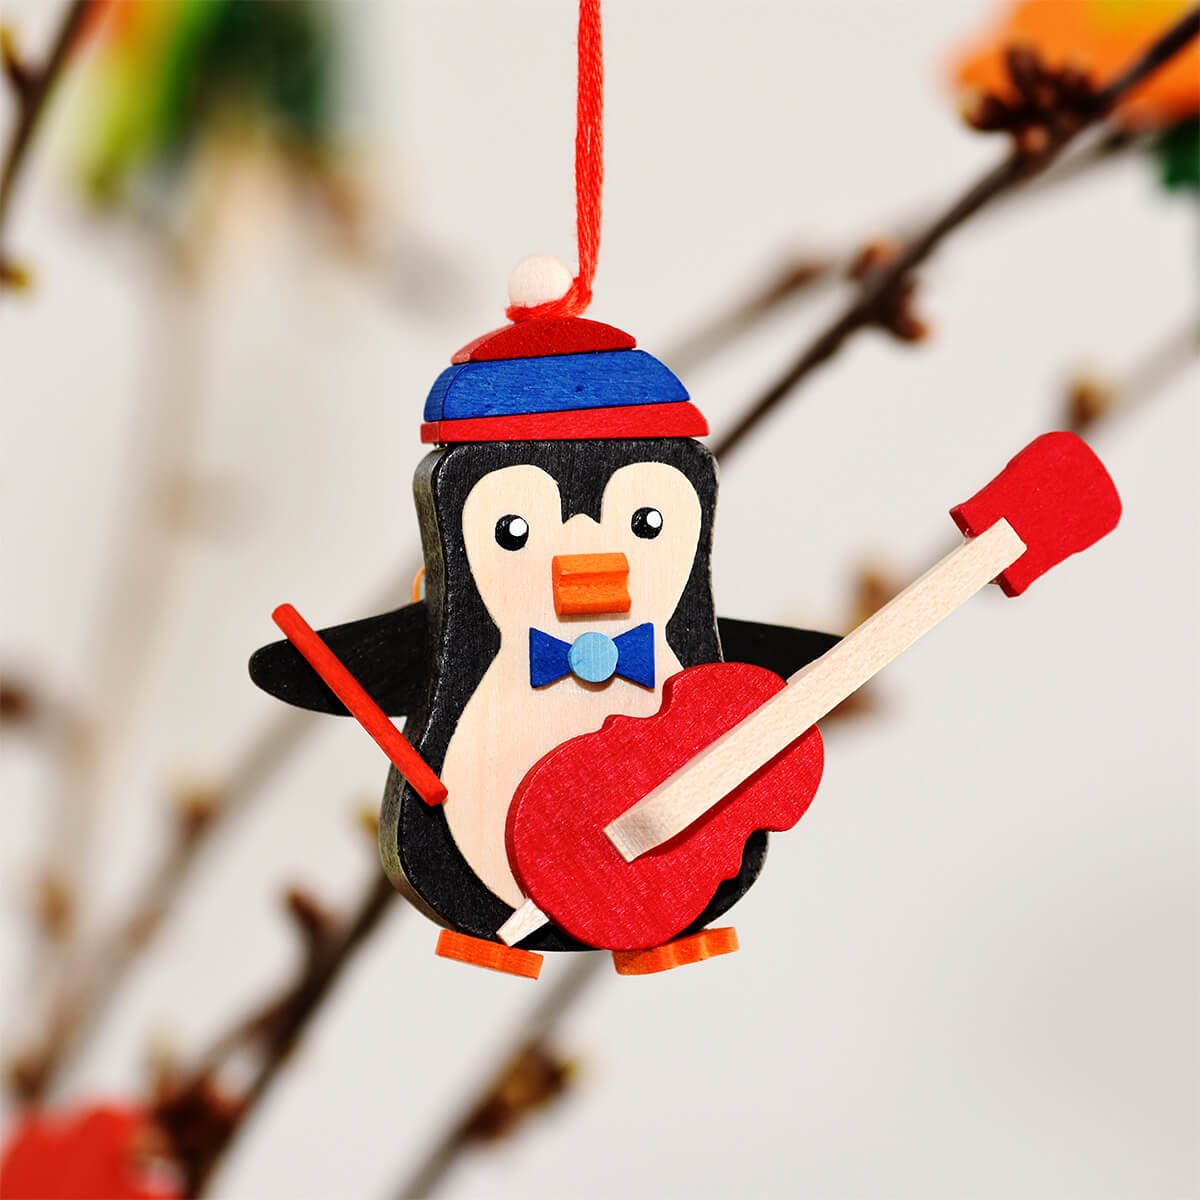 Penguin Ornament with tree